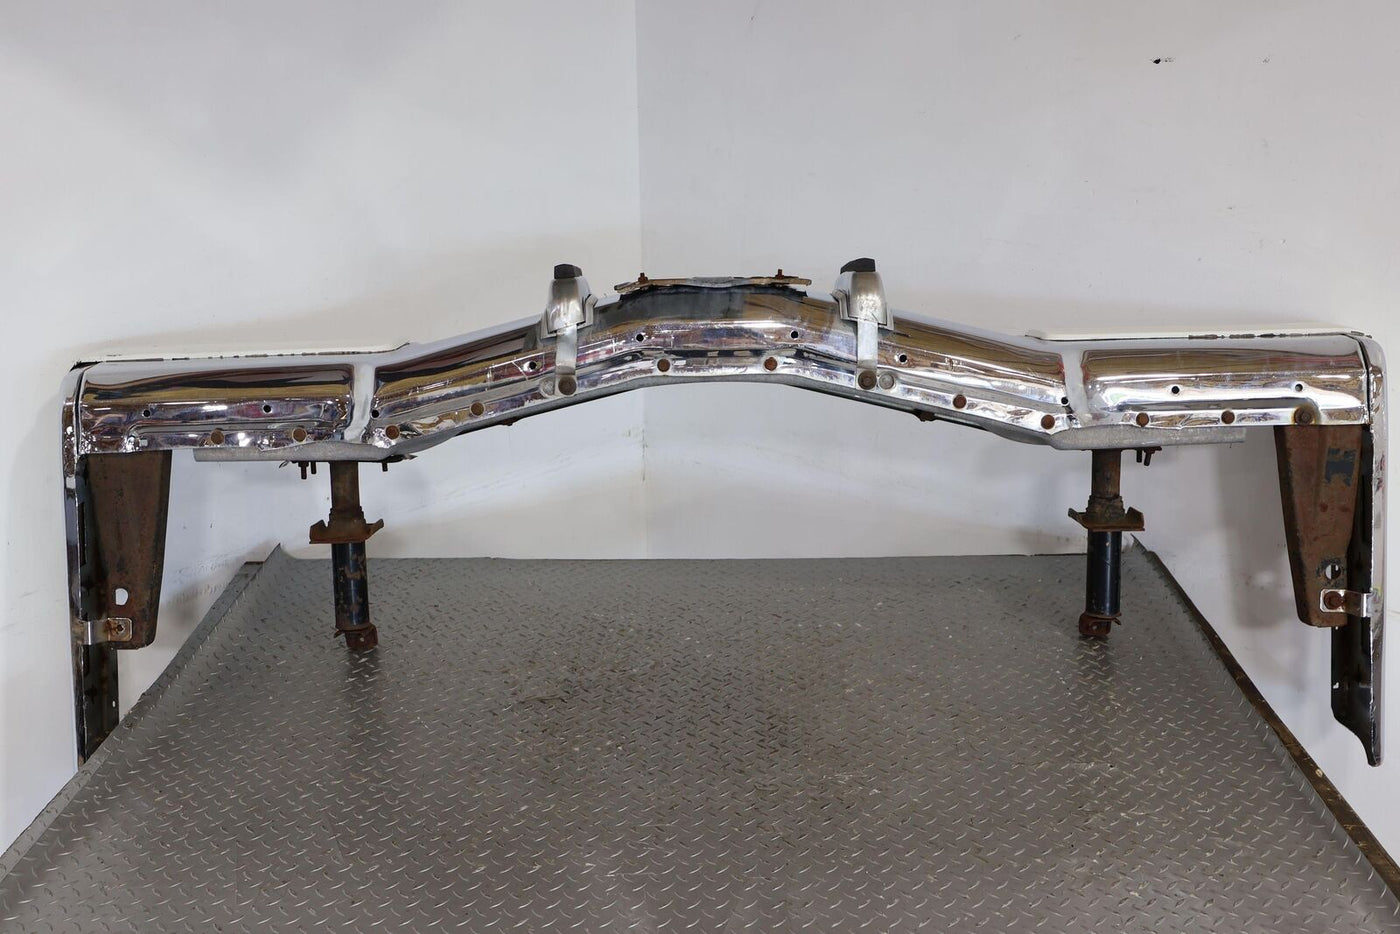 87-89 Cadillac Brougham Front Bumper W/Fillers (Chrome &White) Lightly Weathered